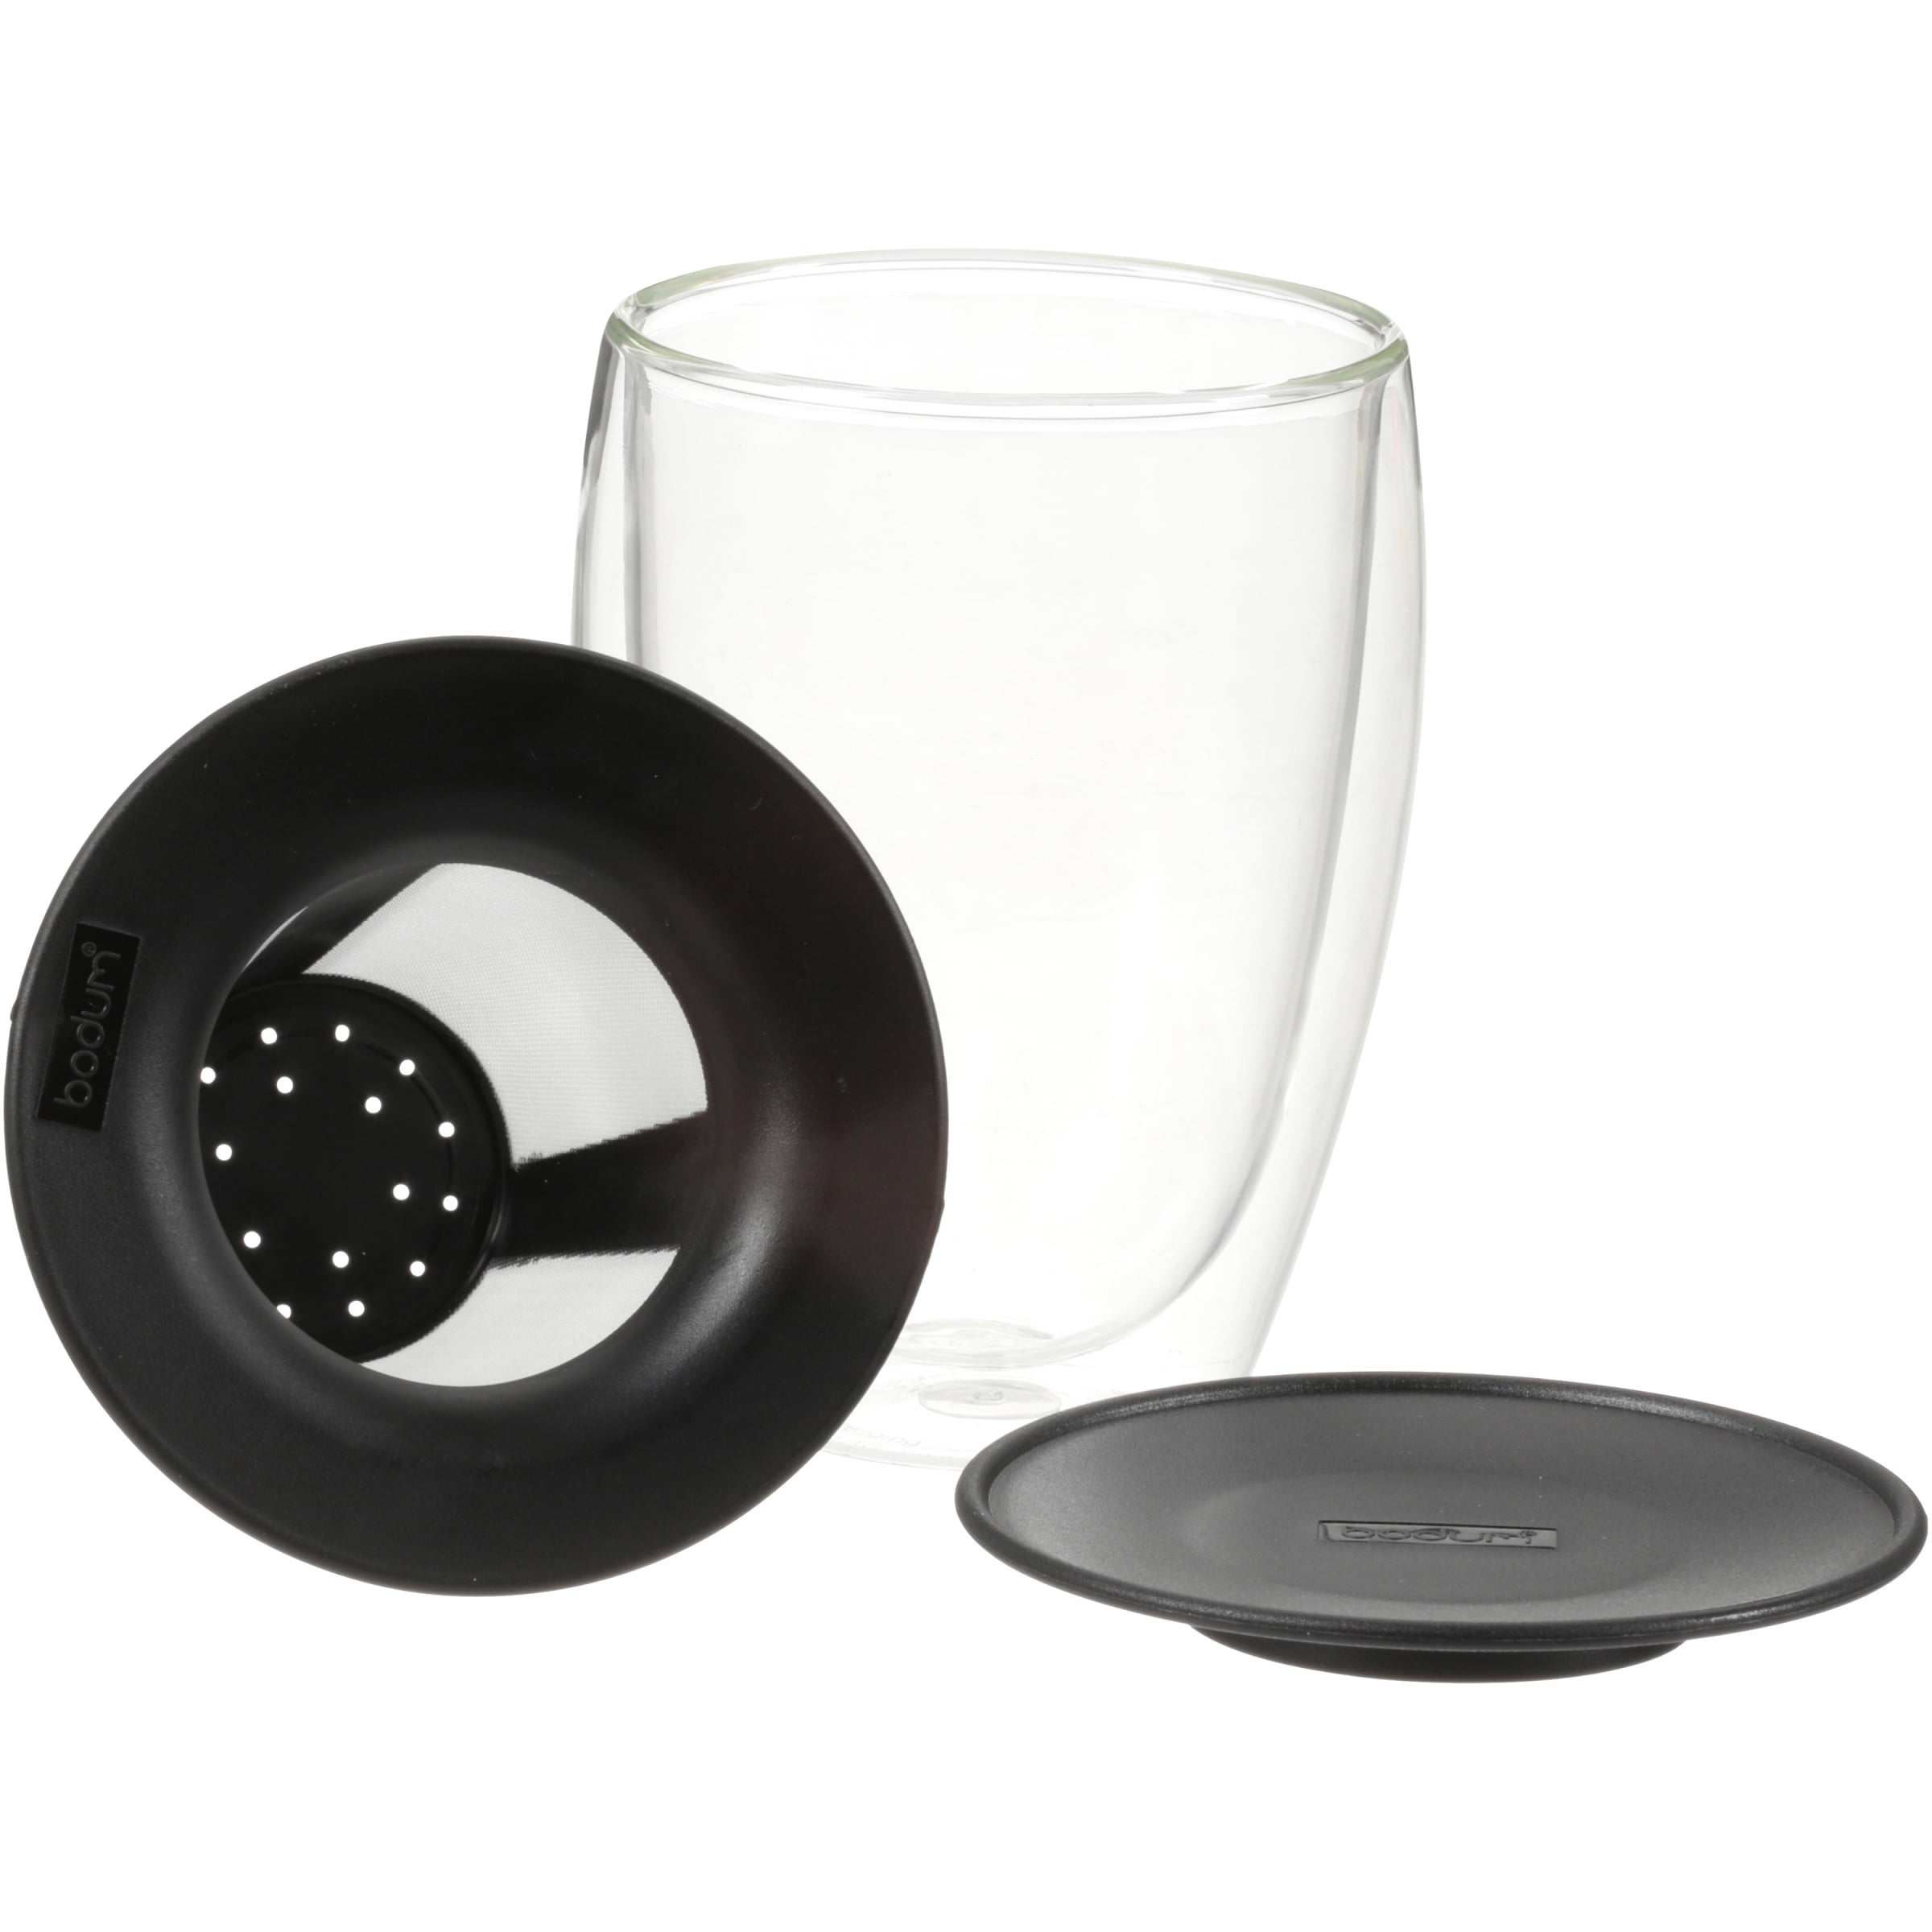 Bodum 12-Ounce Tea for One, Double Wall Glass with Strainer,  Black: Tea Services: Teapots & Coffee Servers